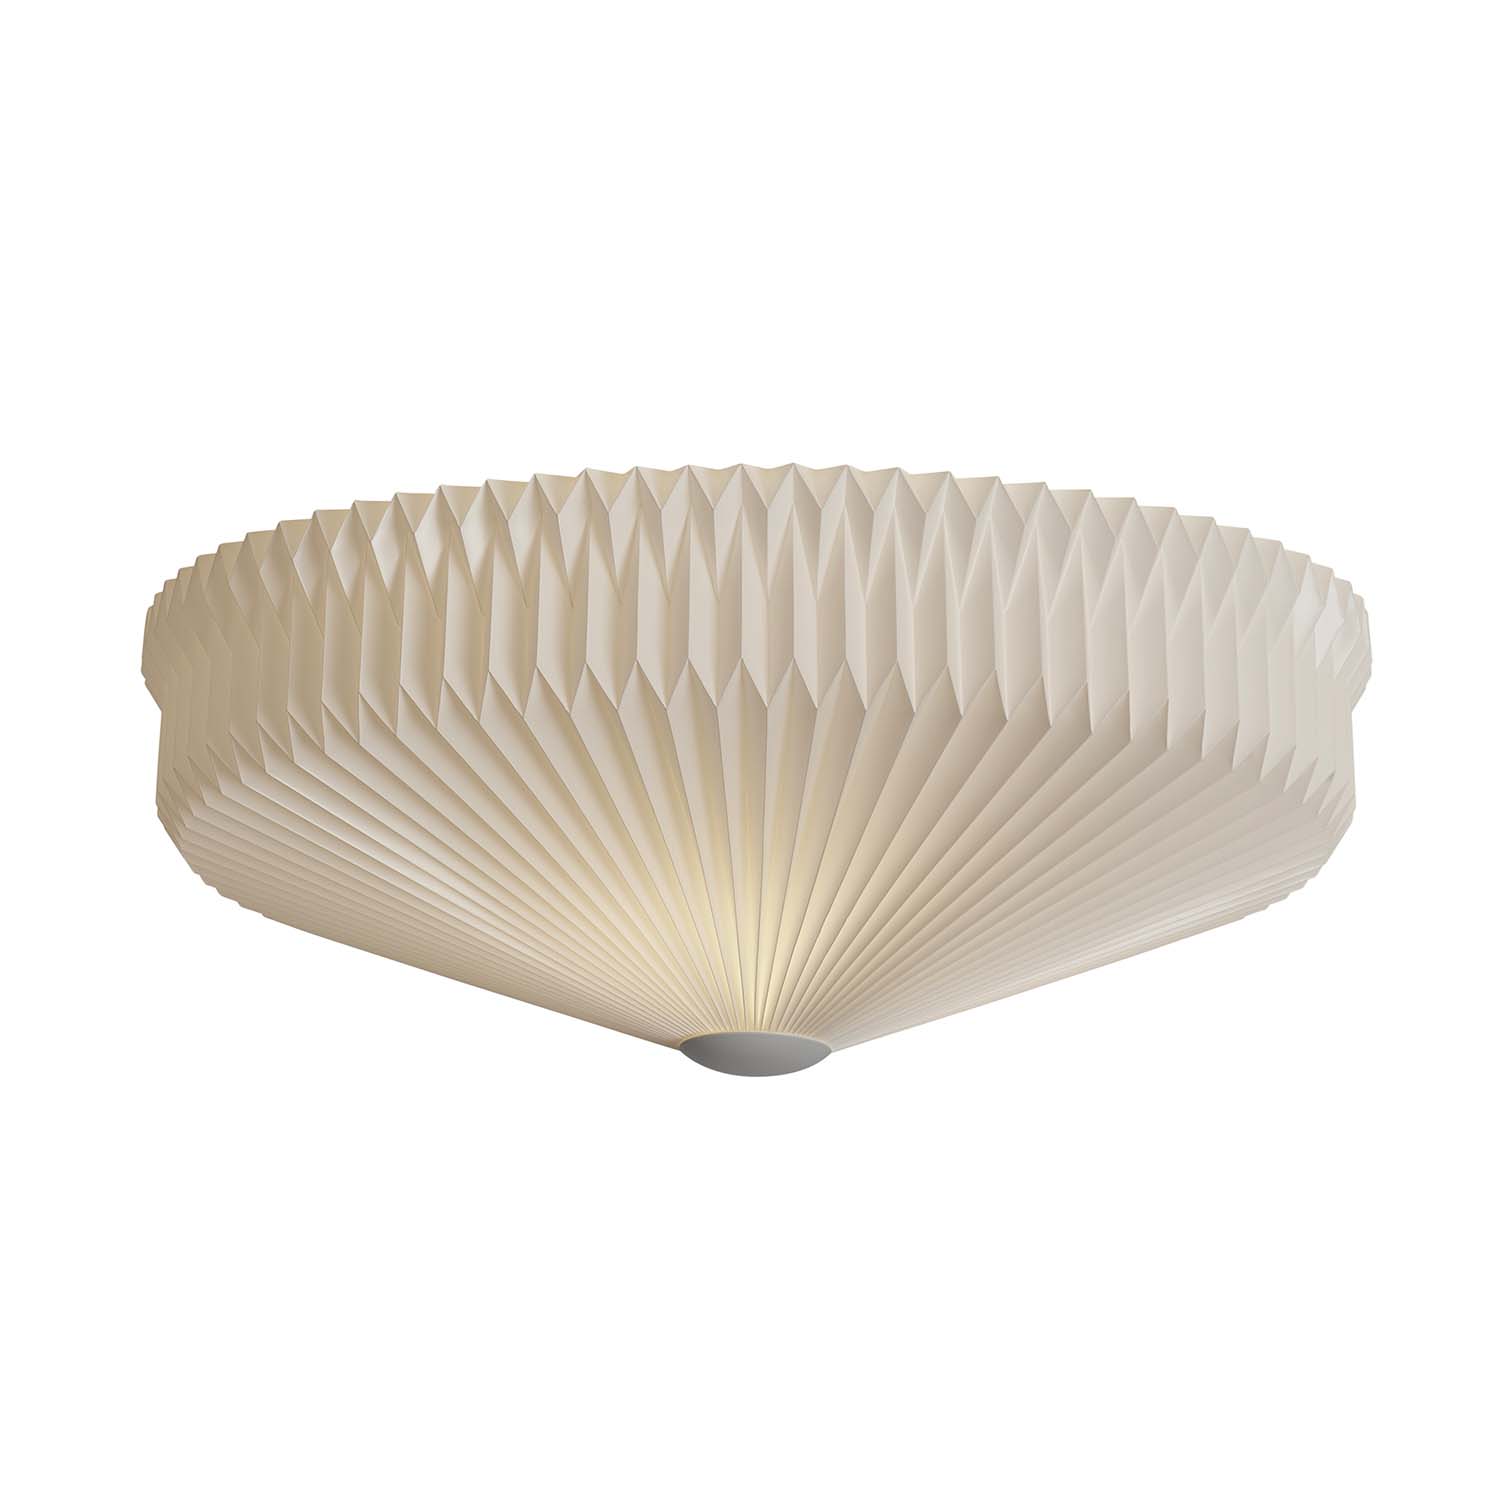 CLASSIC 30 - White vintage pleated acrylic ceiling light for living room